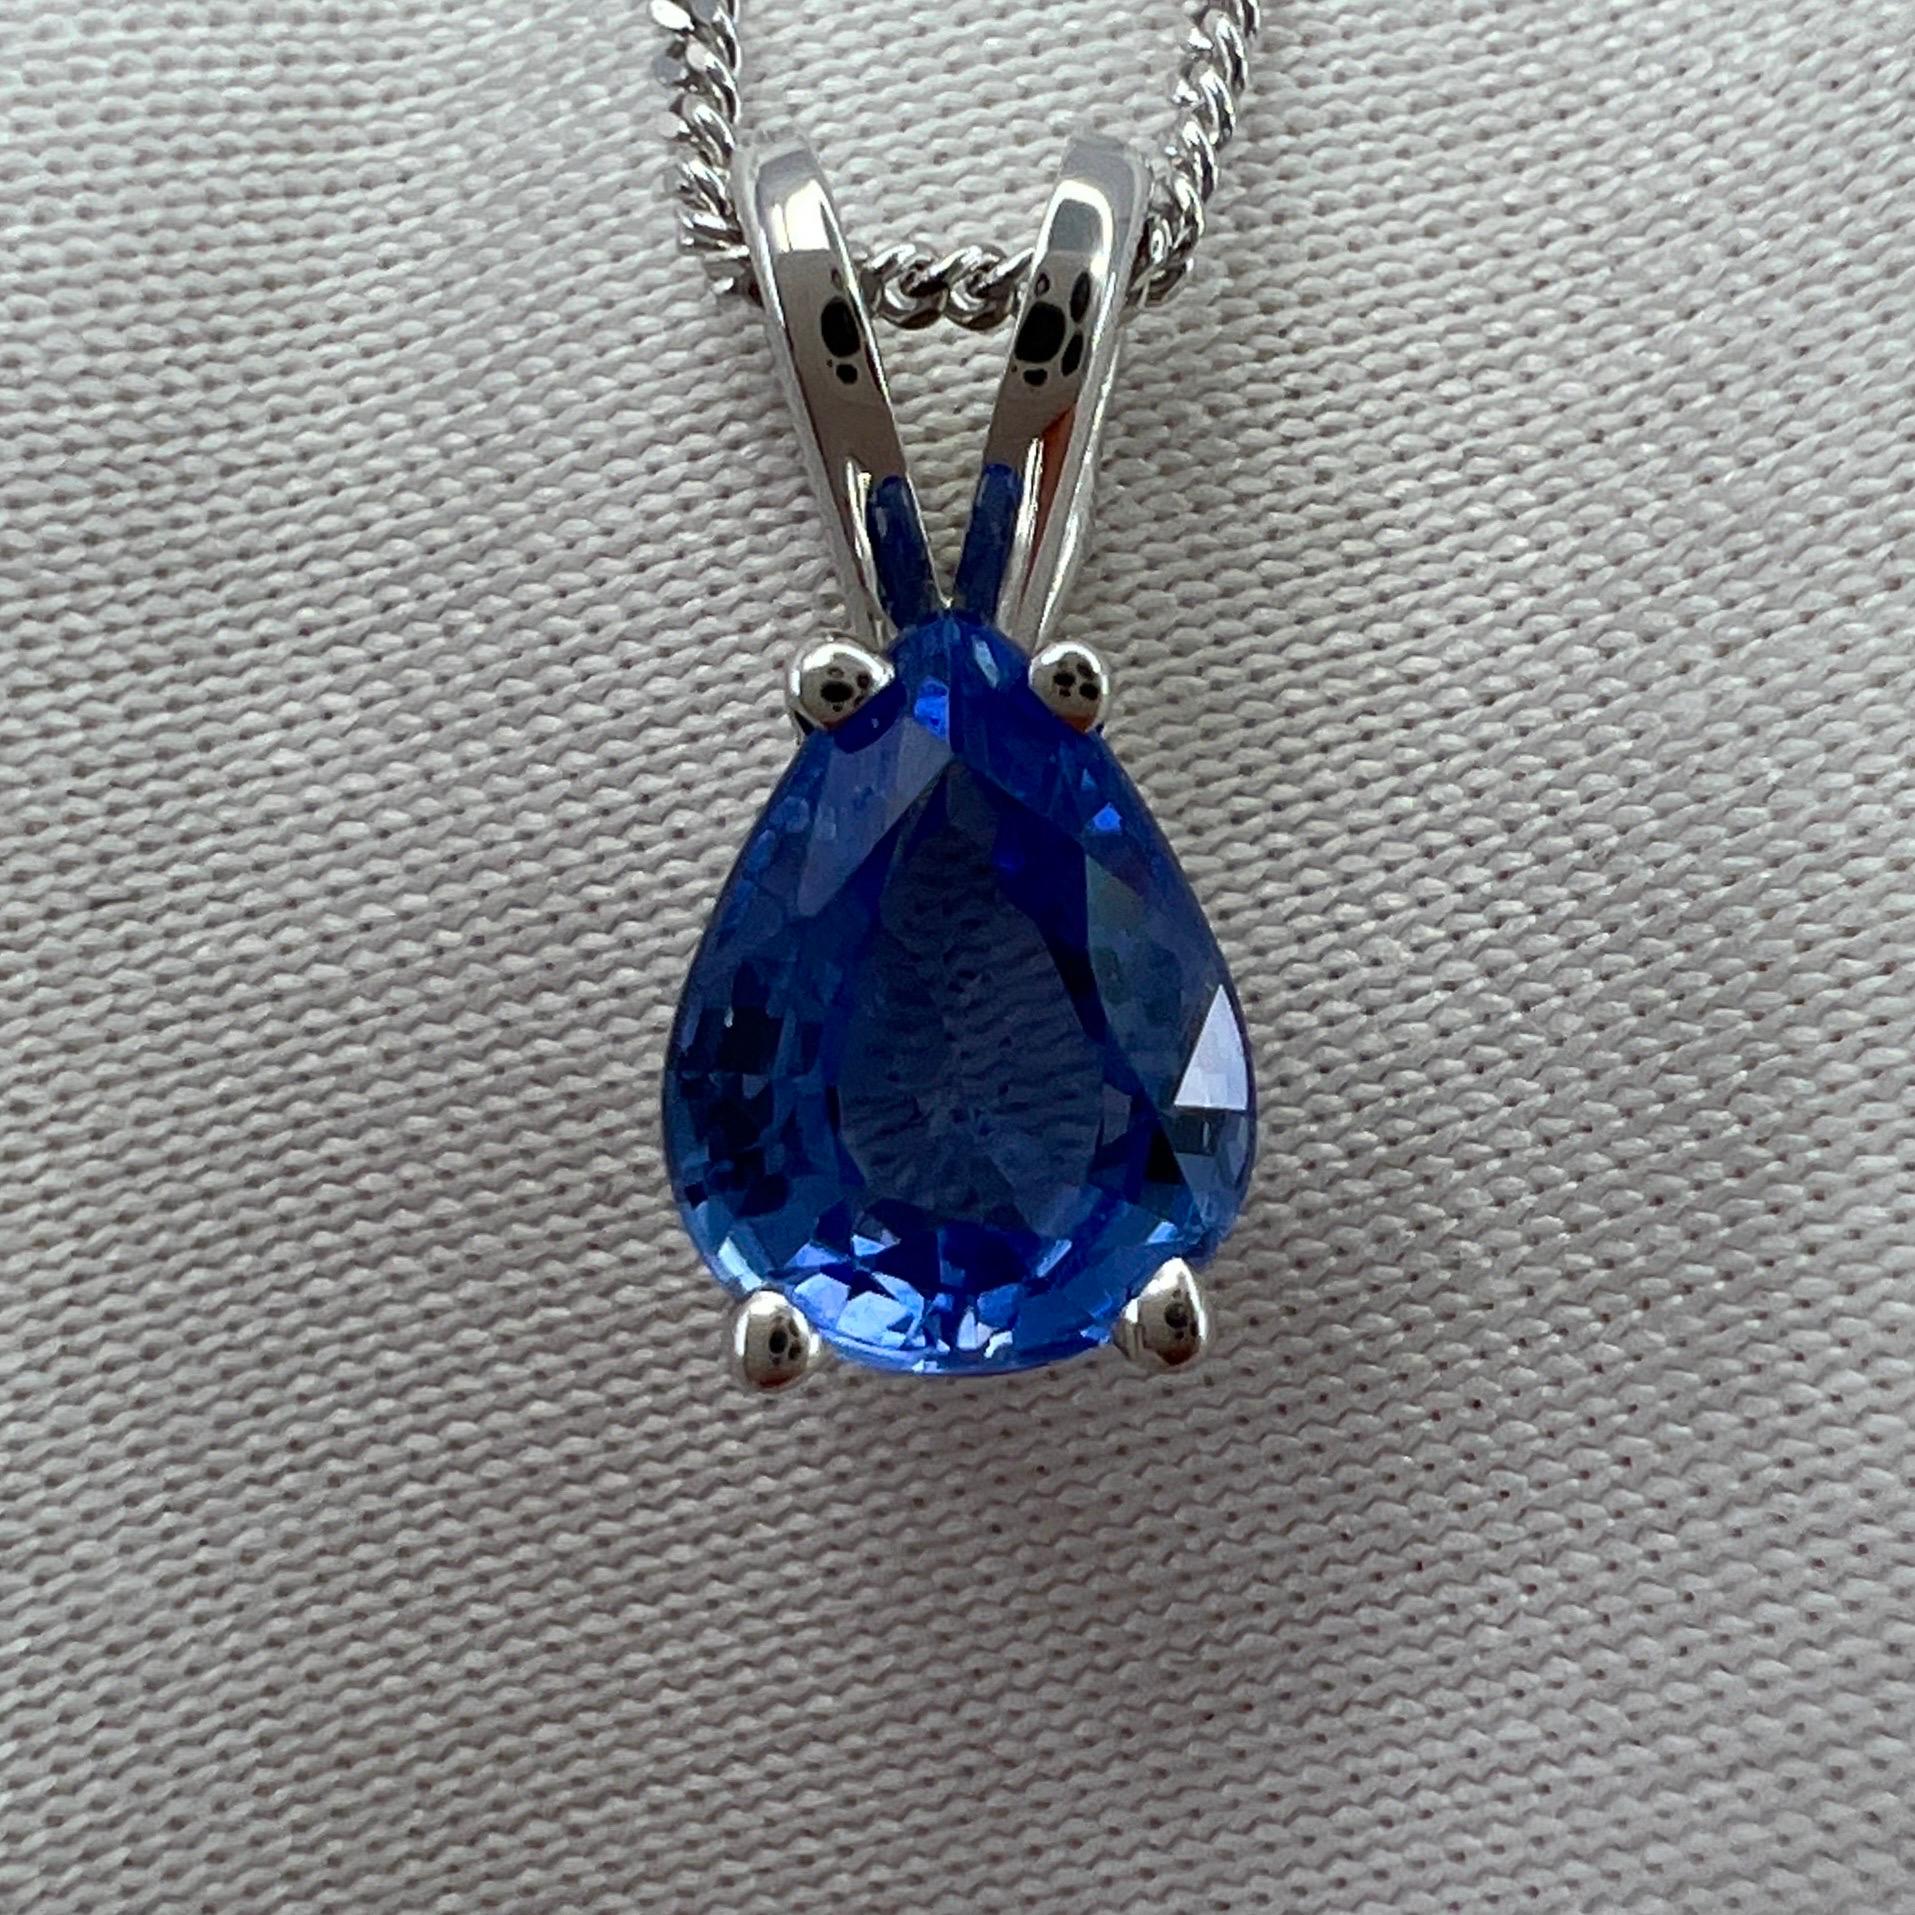 Fine Cornflower Blue Ceylon Sapphire 18K White Gold Pear Cut Pendant Necklace.

Stunning 1.12 Ceylon sapphire with a top grade cornflower blue colour and excellent clarity, very clean stone. 
Mined in Sri Lanka, source of some of the worlds finest